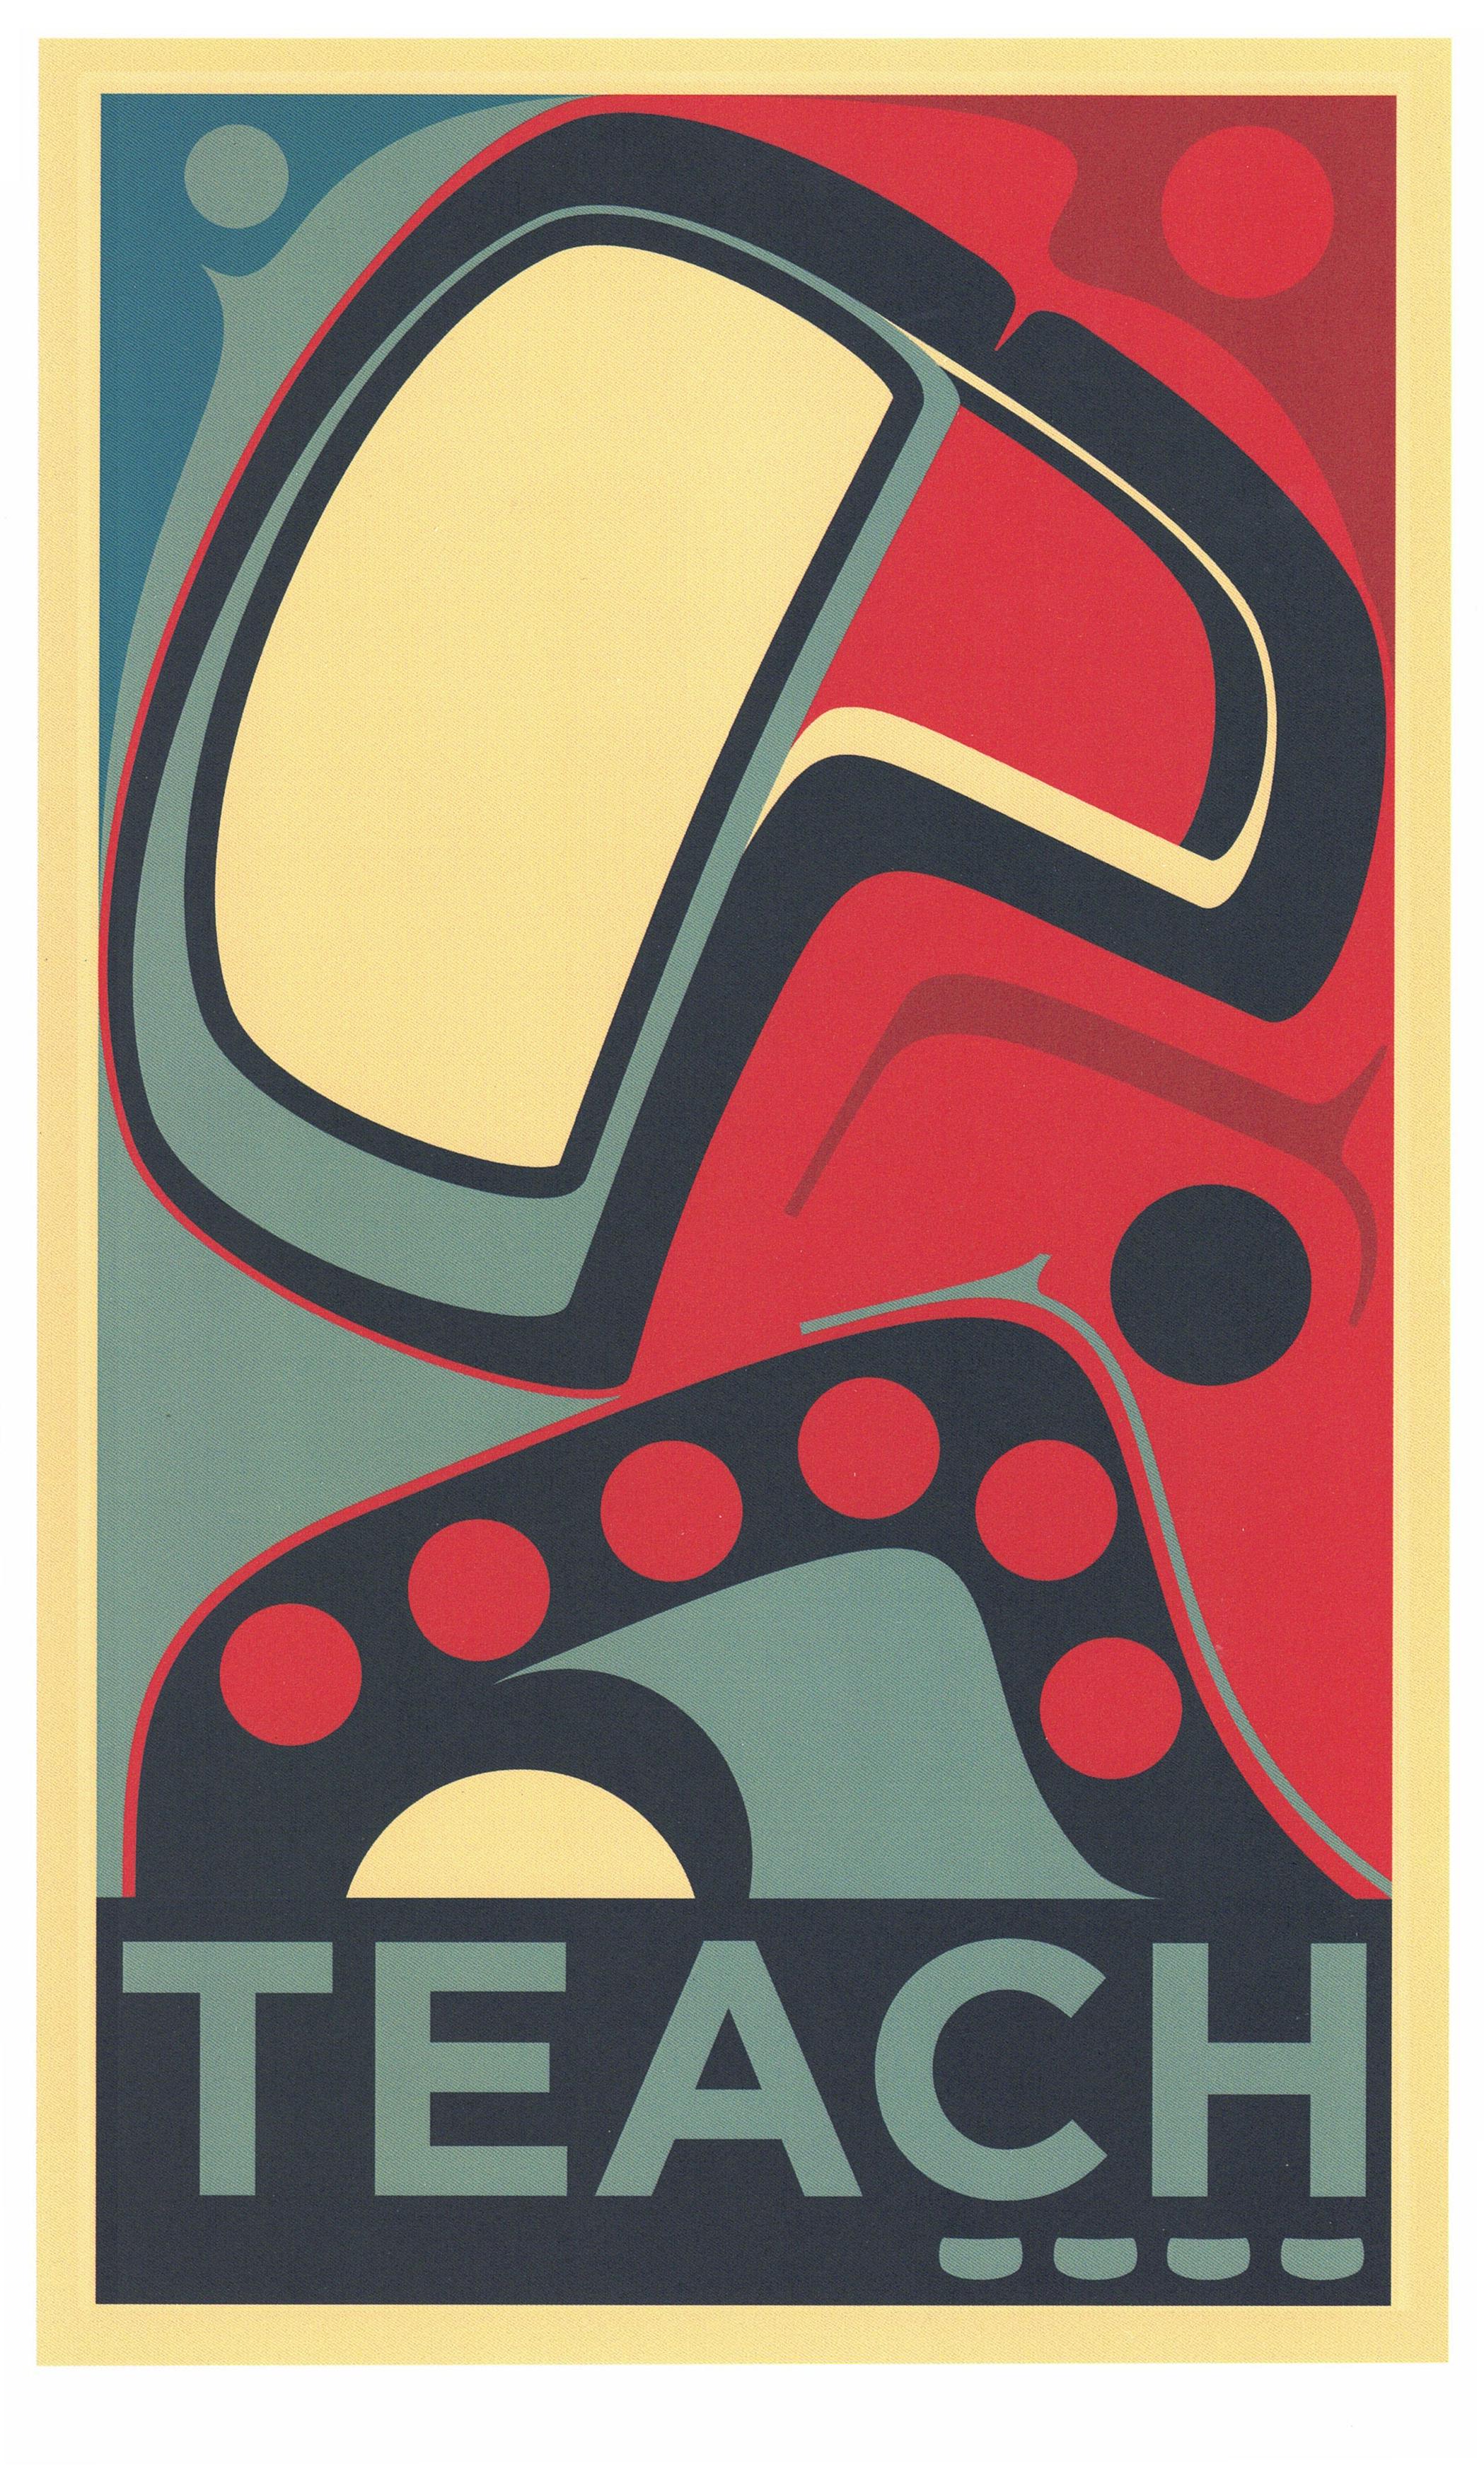 Sonny Assu Abstract Print - There is Hope, If We Rise (Teach)